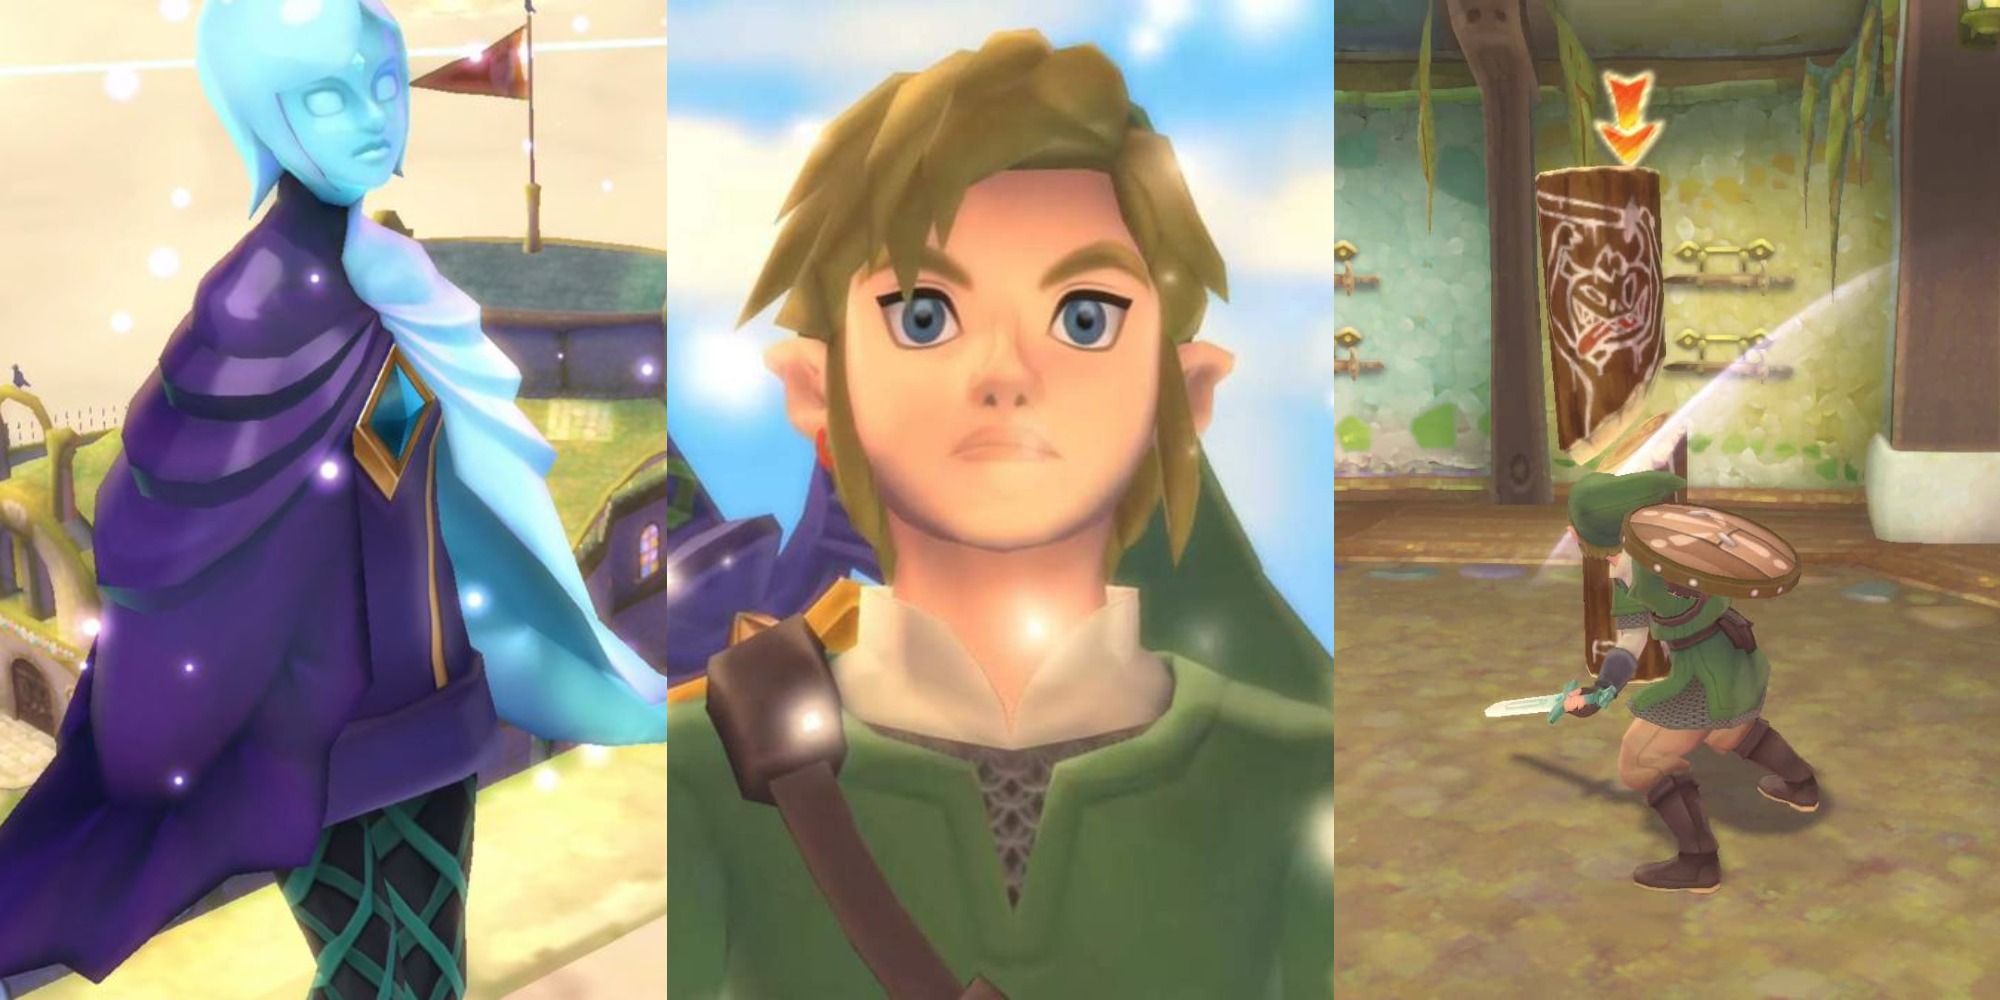 Three images side by side of Fi, Link, and Link slashing at a wooden pole with his sword in Skyward Sword